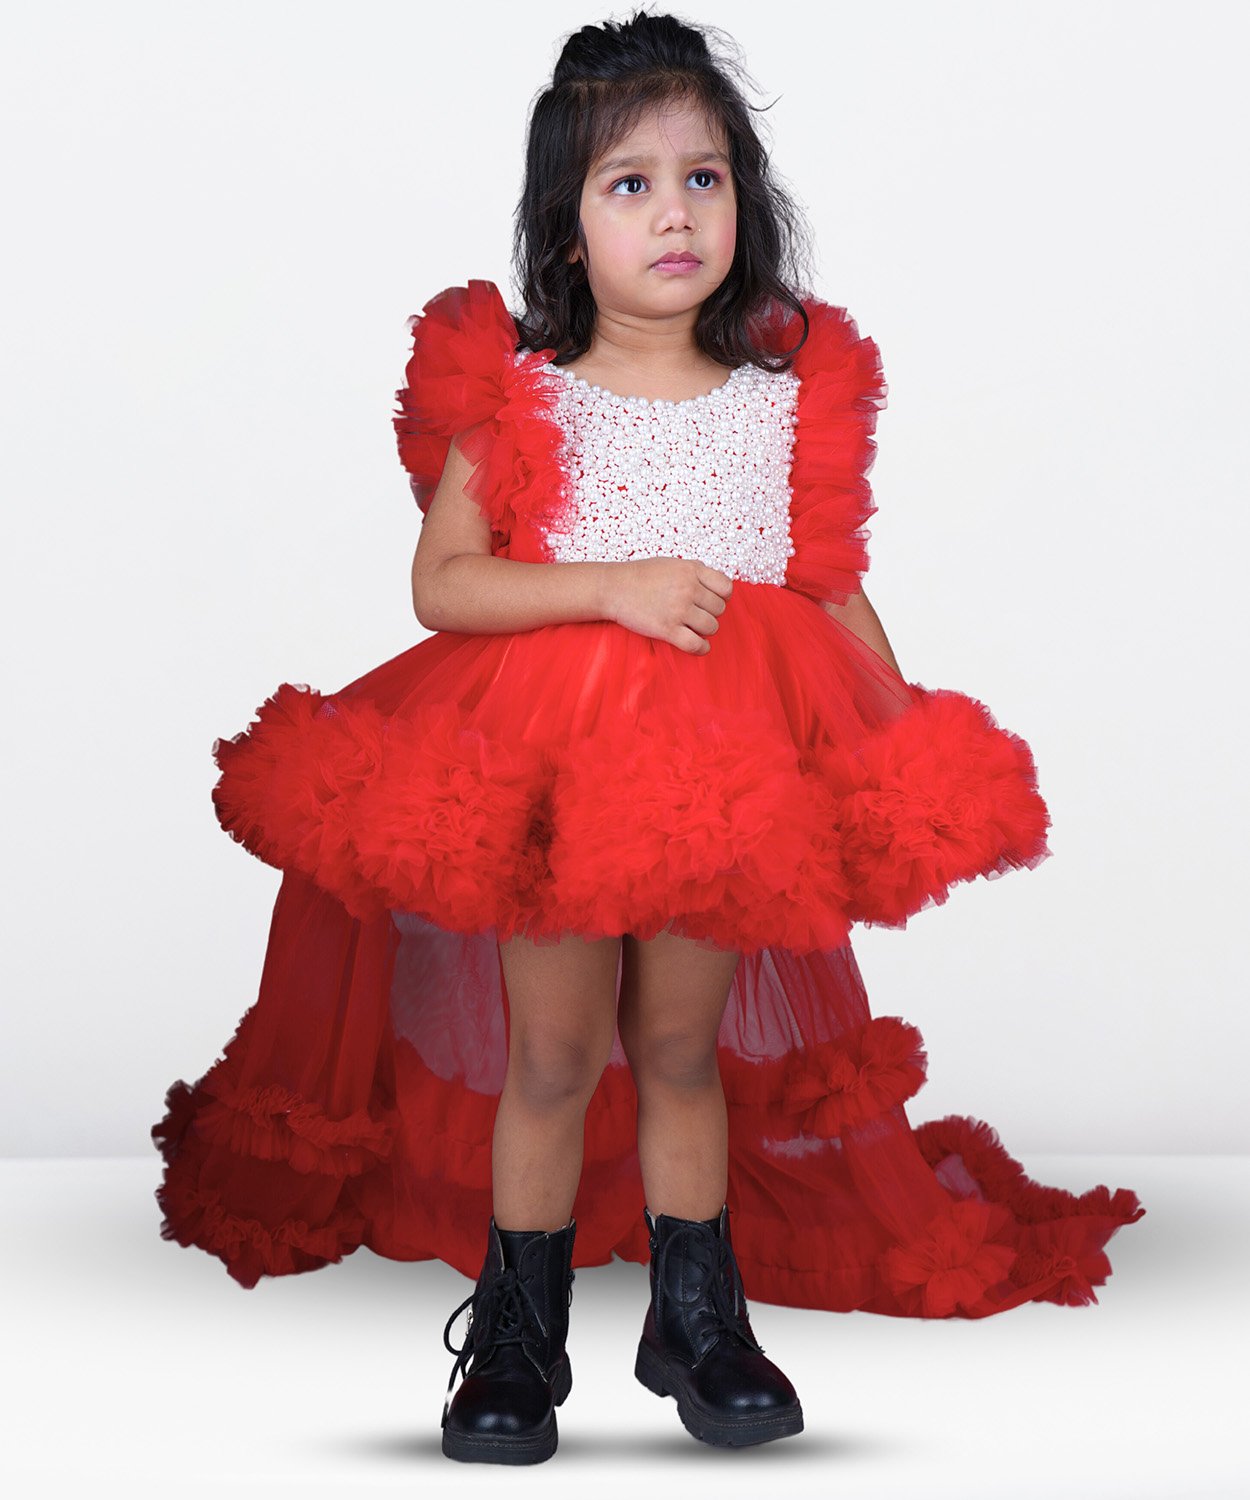 A Vibrant Pink Dress With Puffy Sleeves And A Full, Pleated Skirt, Perfect For Kids. 